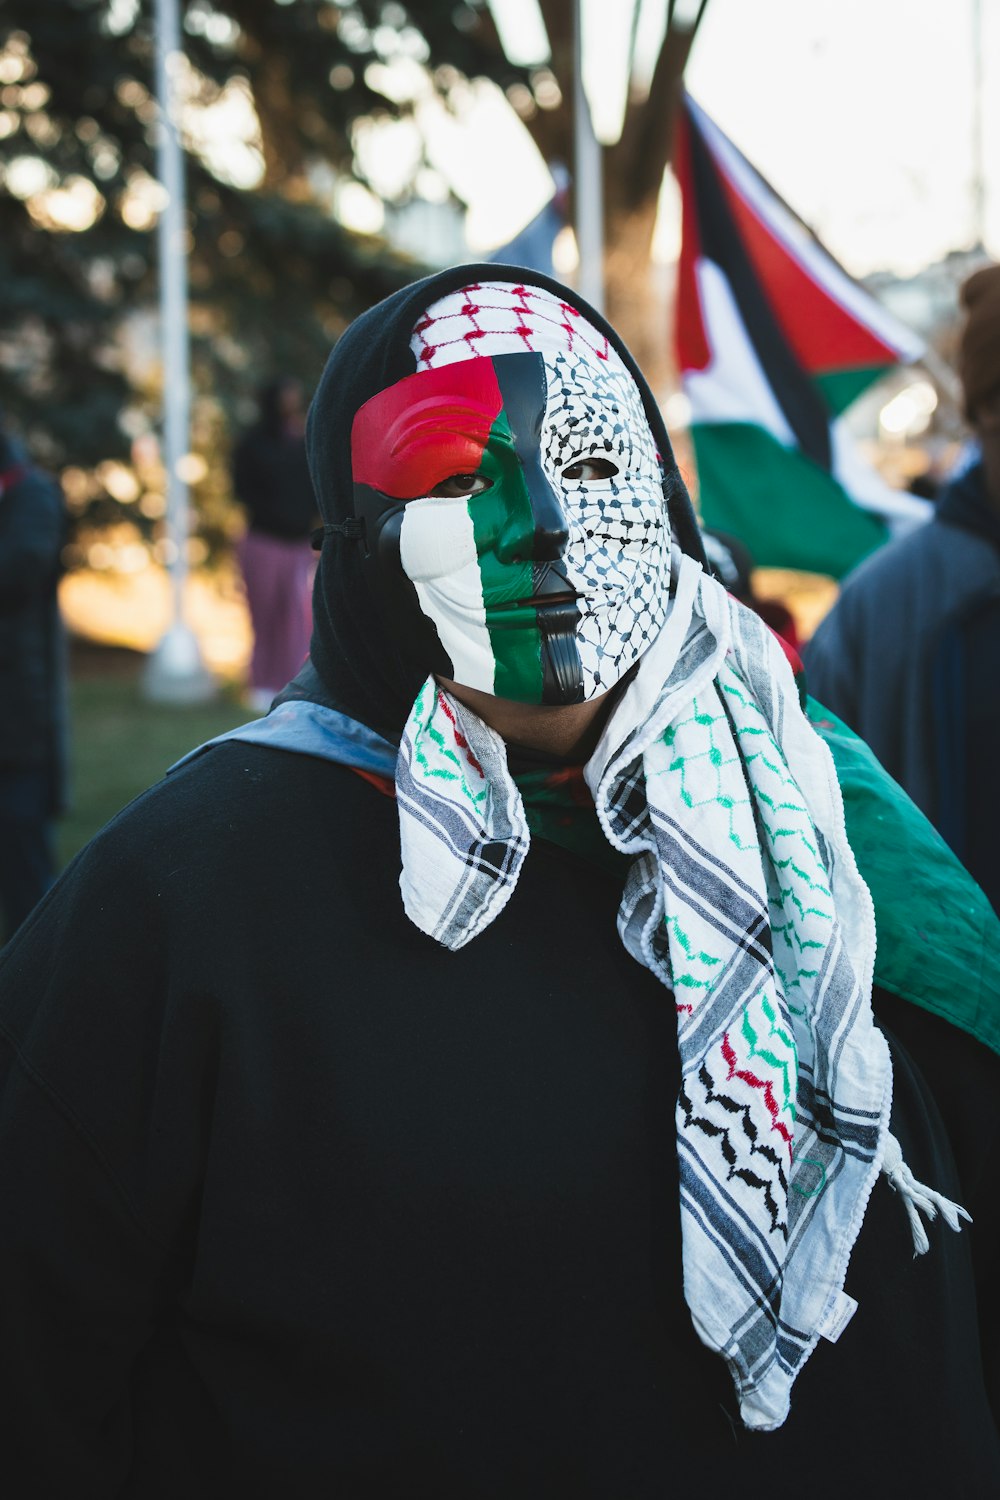 a man wearing a mask with a flag painted on it